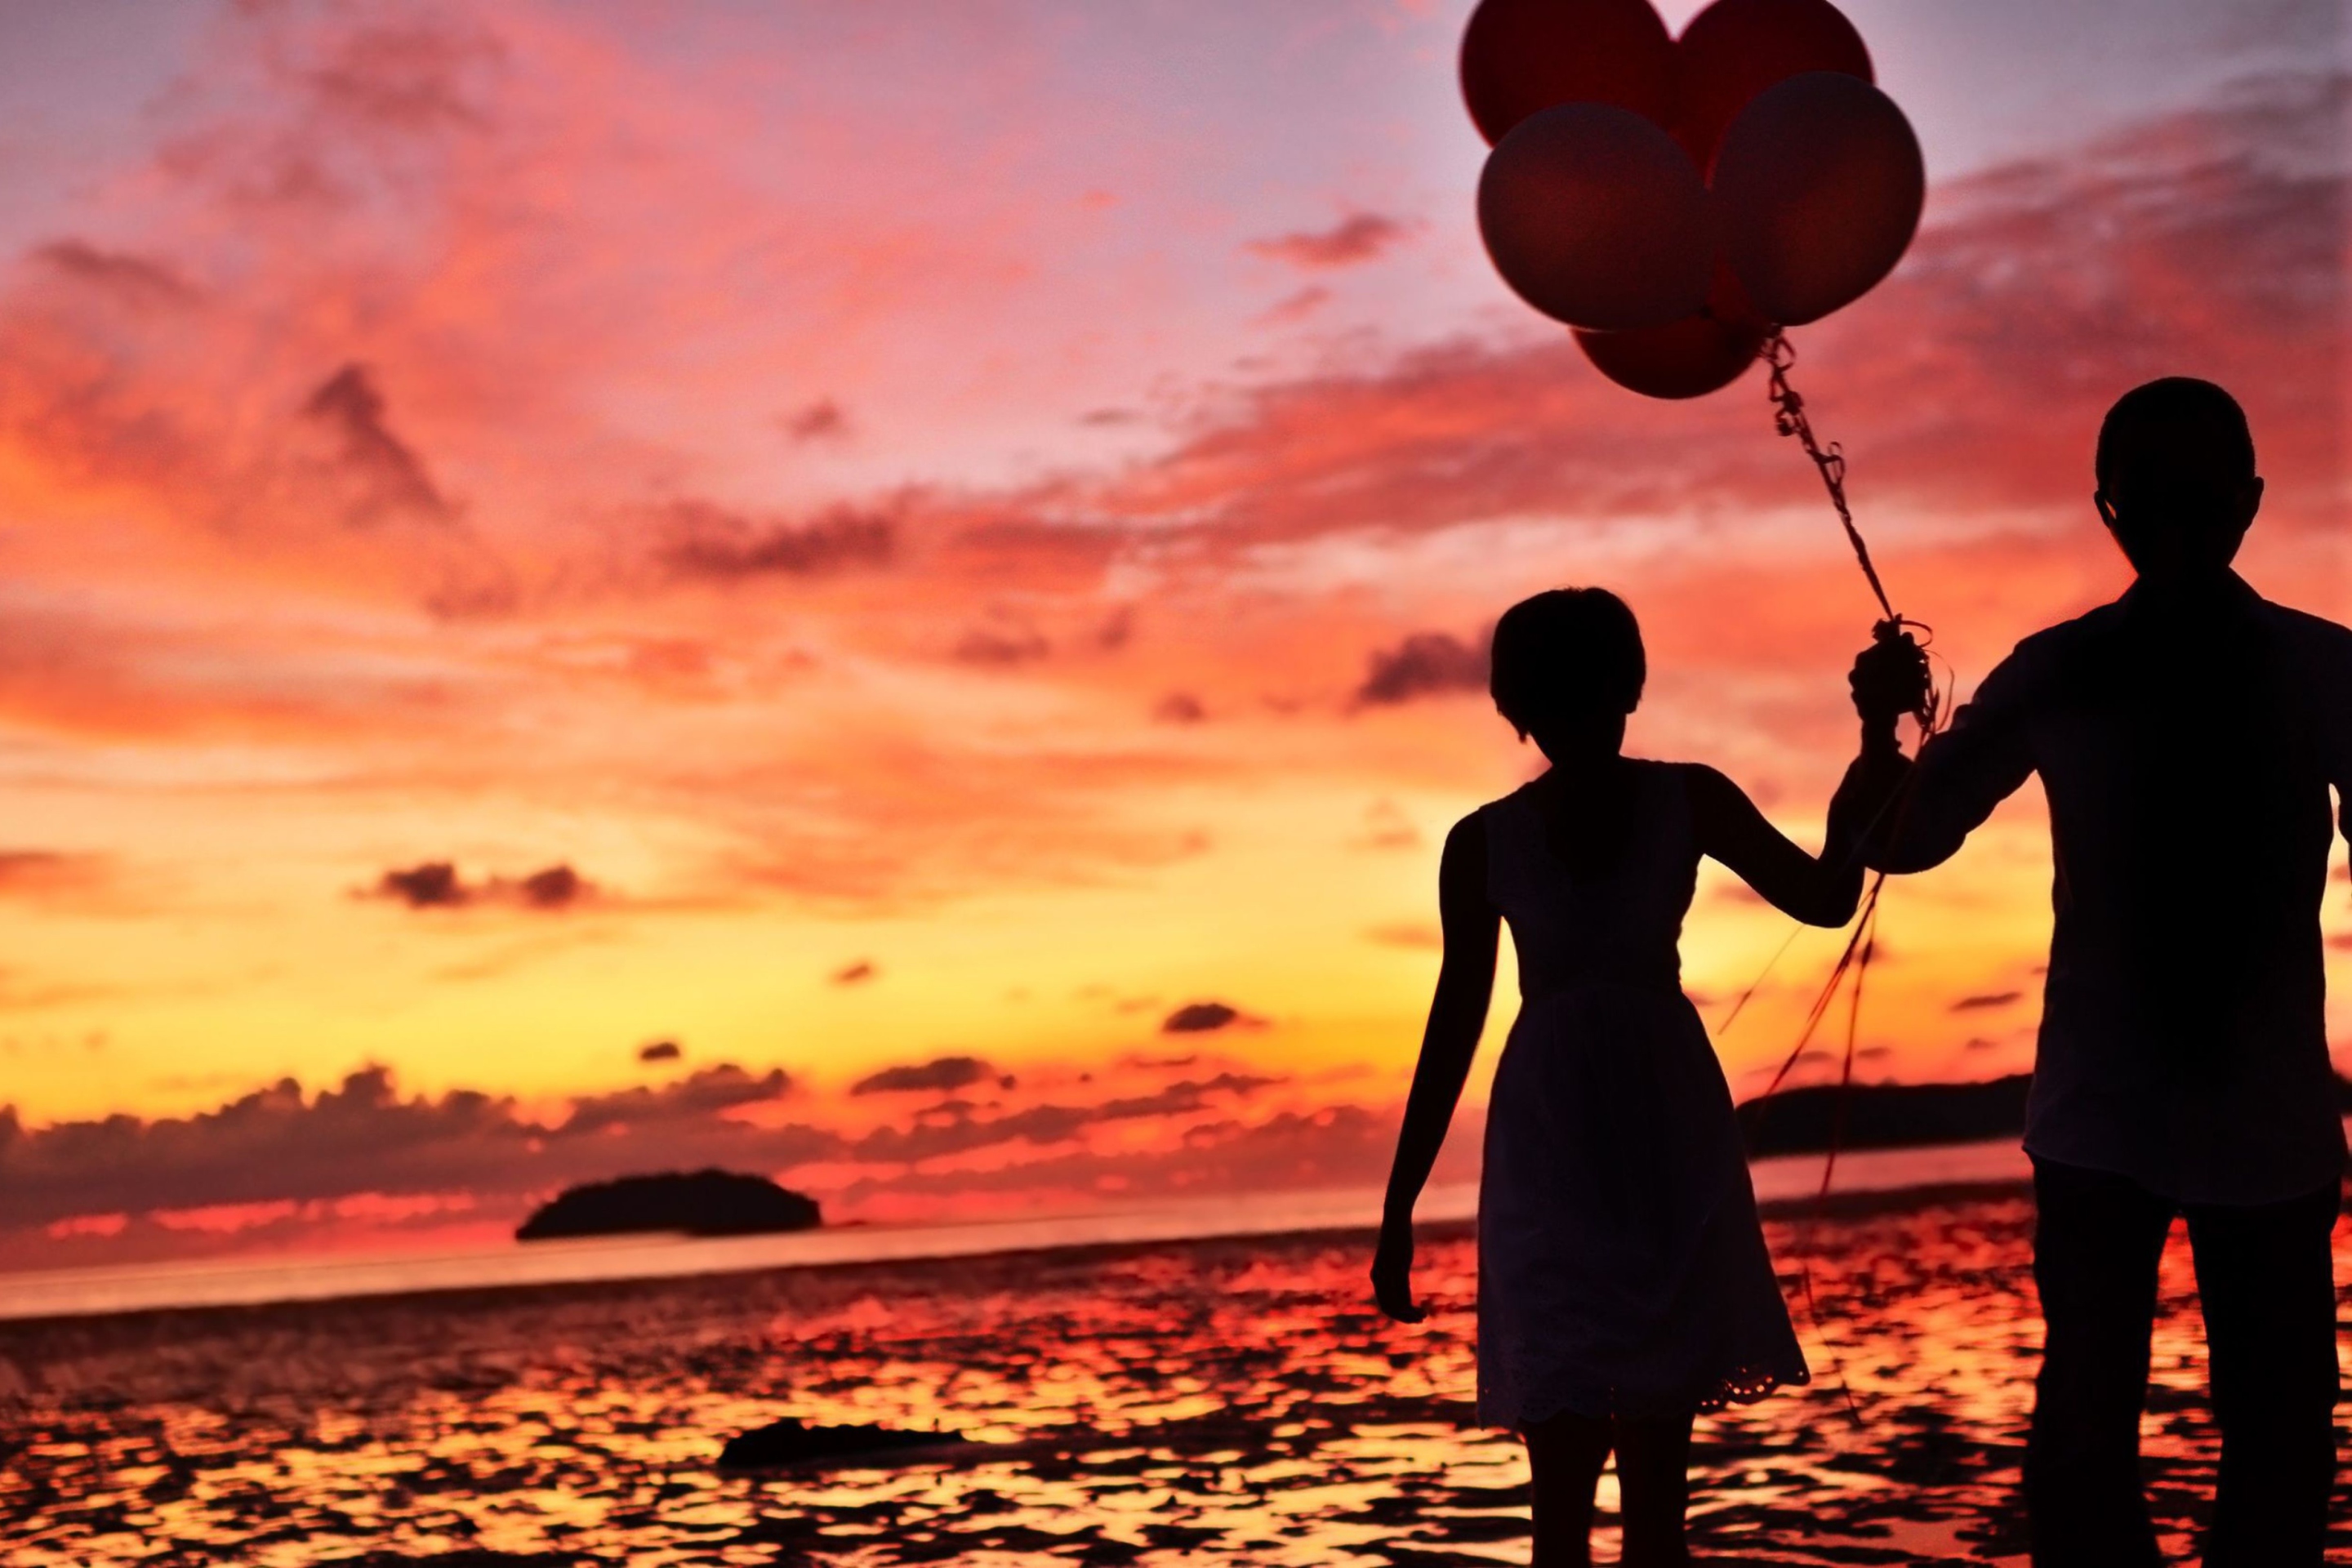 Обои Couple With Balloons Silhouette At Sunset 2880x1920